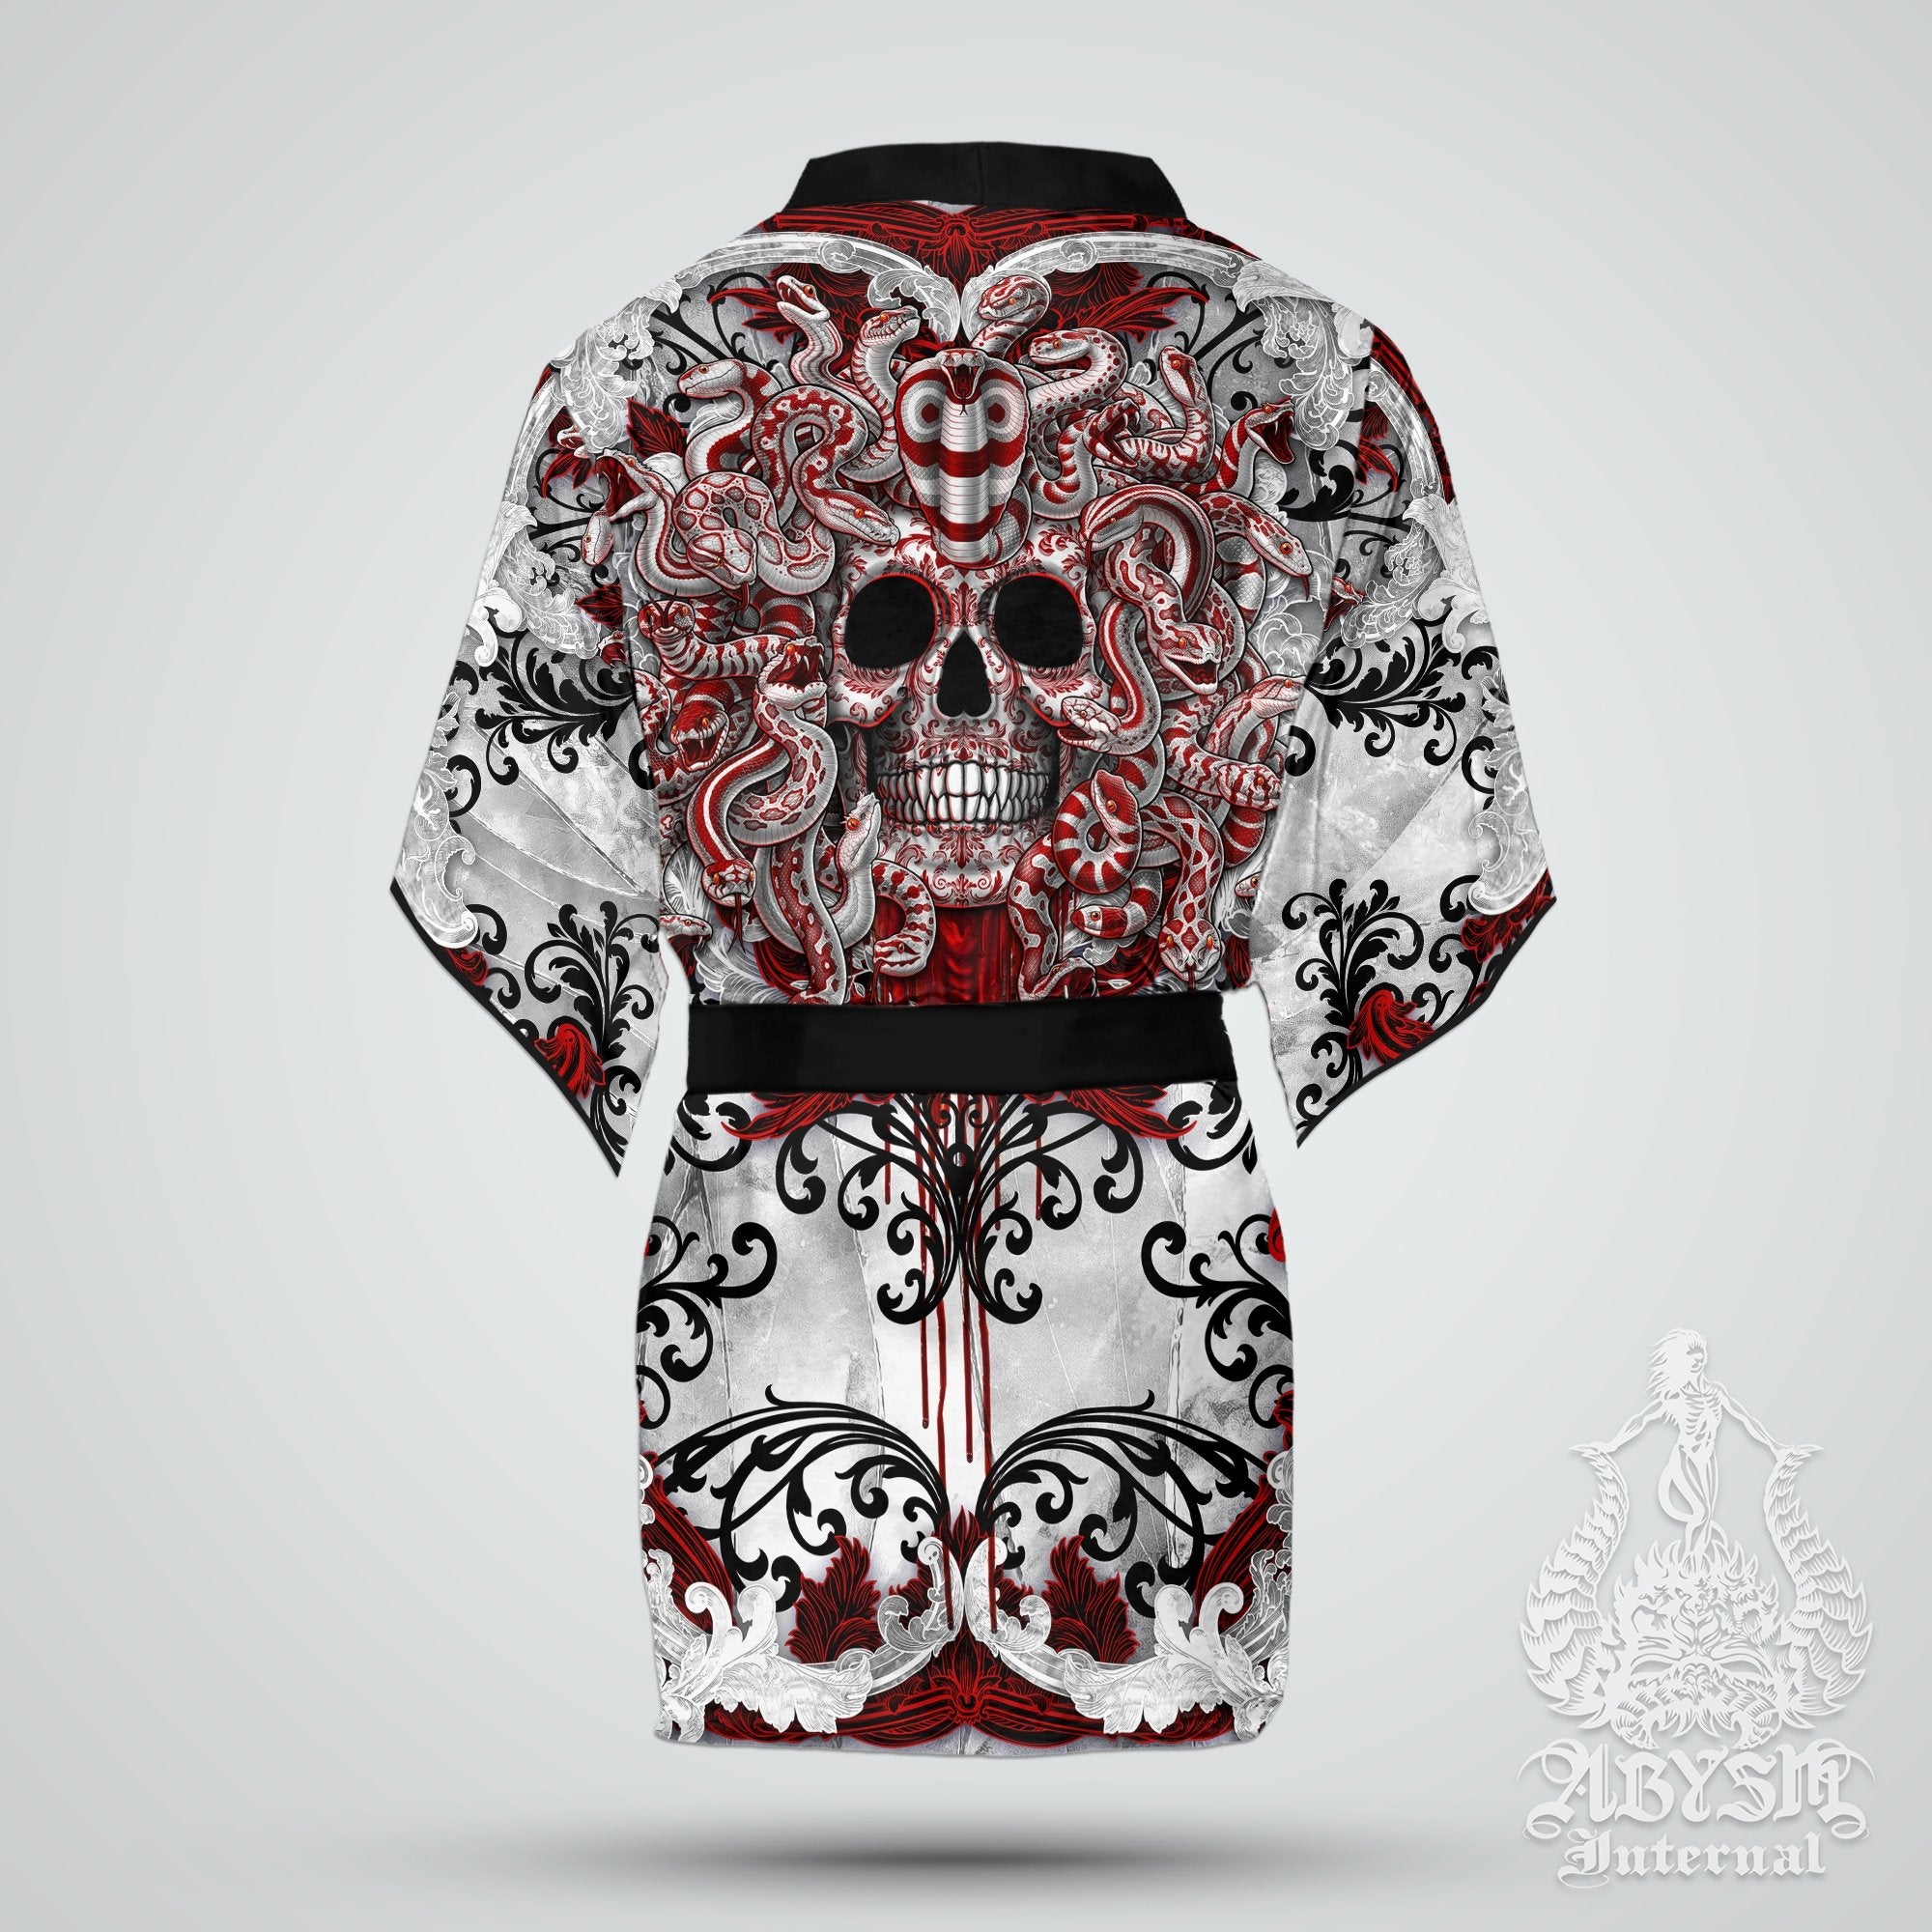 Medusa Skull Cover Up, Beach Outfit, Party Kimono, Summer Festival Robe, Indie and Alternative Clothing, Unisex - Bloody White Goth - Abysm Internal